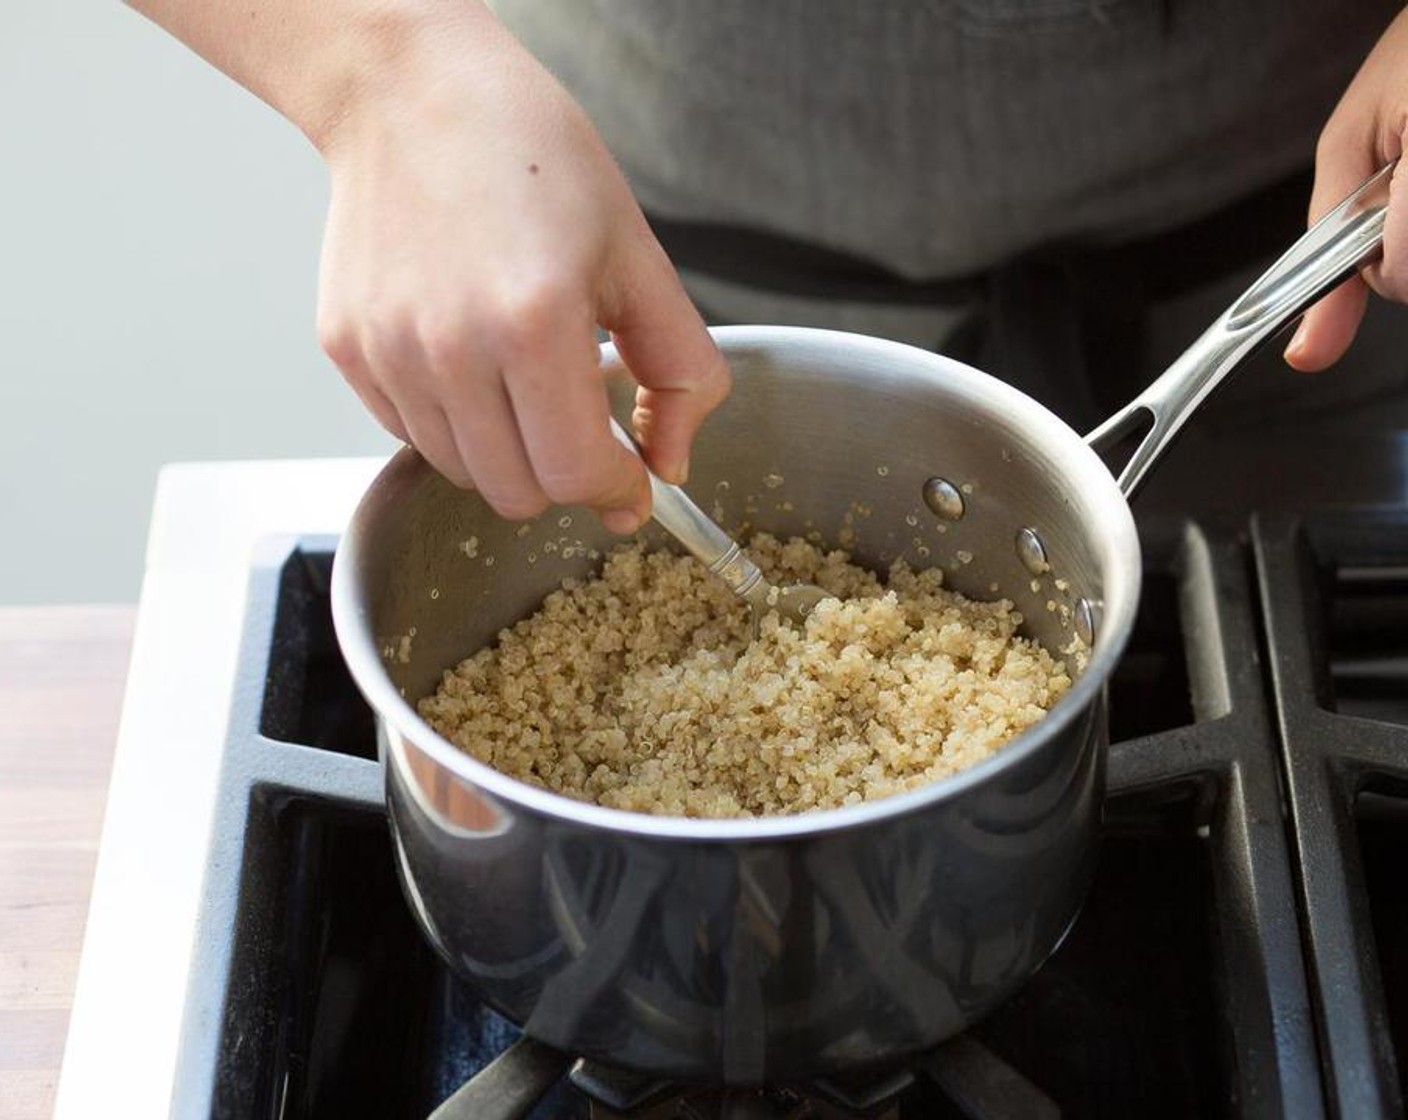 step 1 In a small sauce pot over medium-high heat, bring some Water (1 1/2 cups) to a boil. Add the Quinoa (2/3 cup) and return to a boil. Reduce heat to low, cover and let simmer for 30 minutes. Remove from heat, fluff with a fork and keep warm.